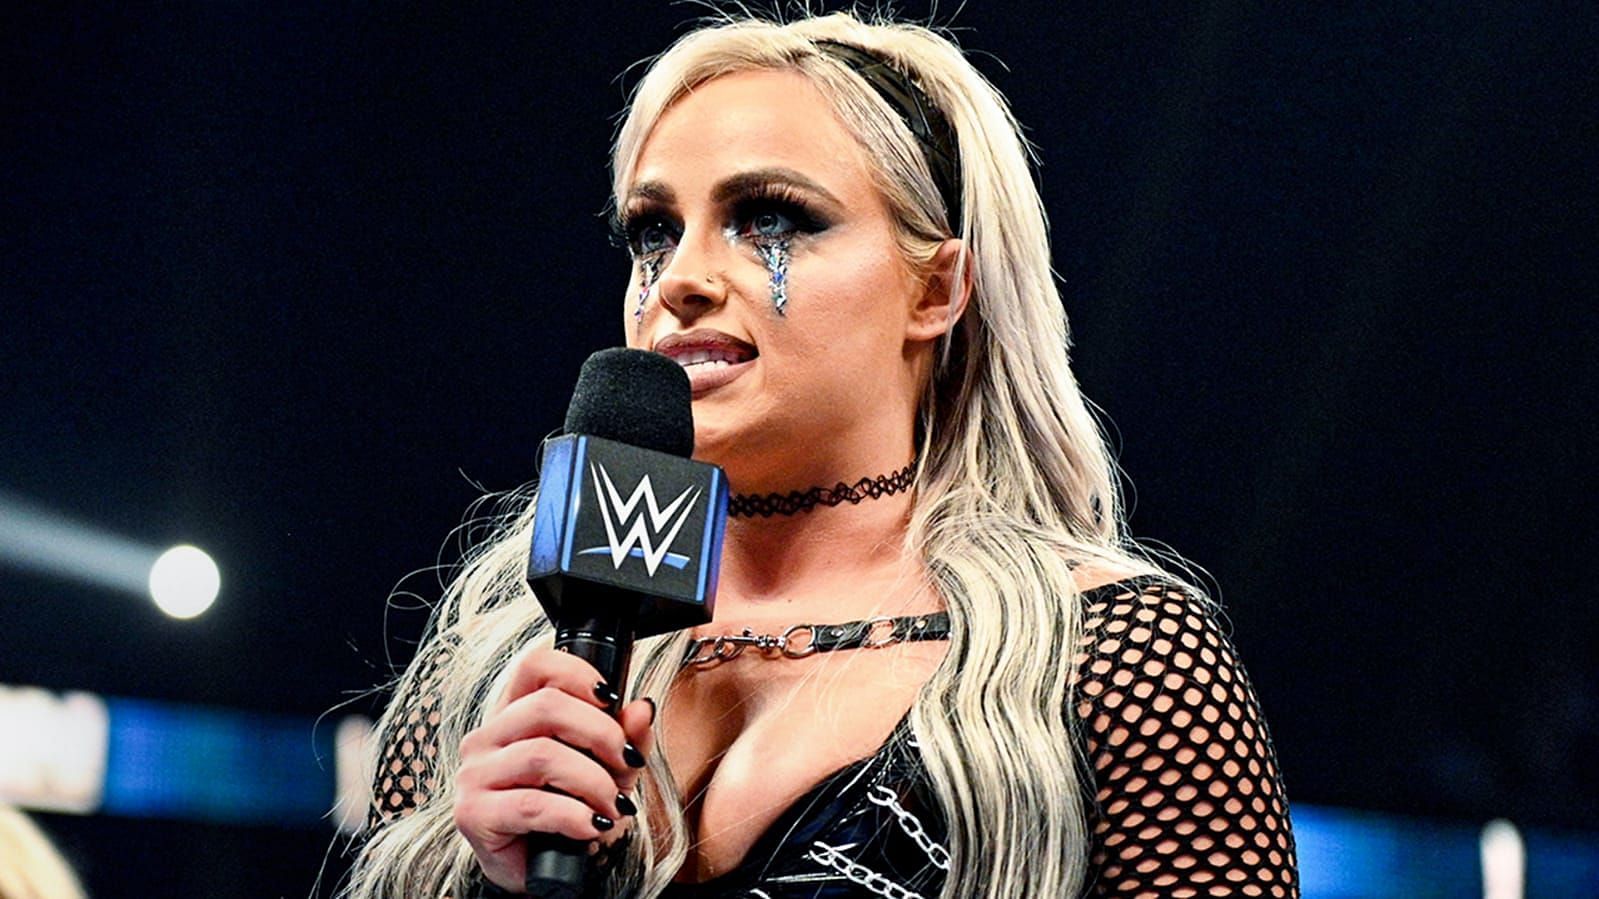 Top WWE Superstar breaks character to wish Liv Morgan on her birthday